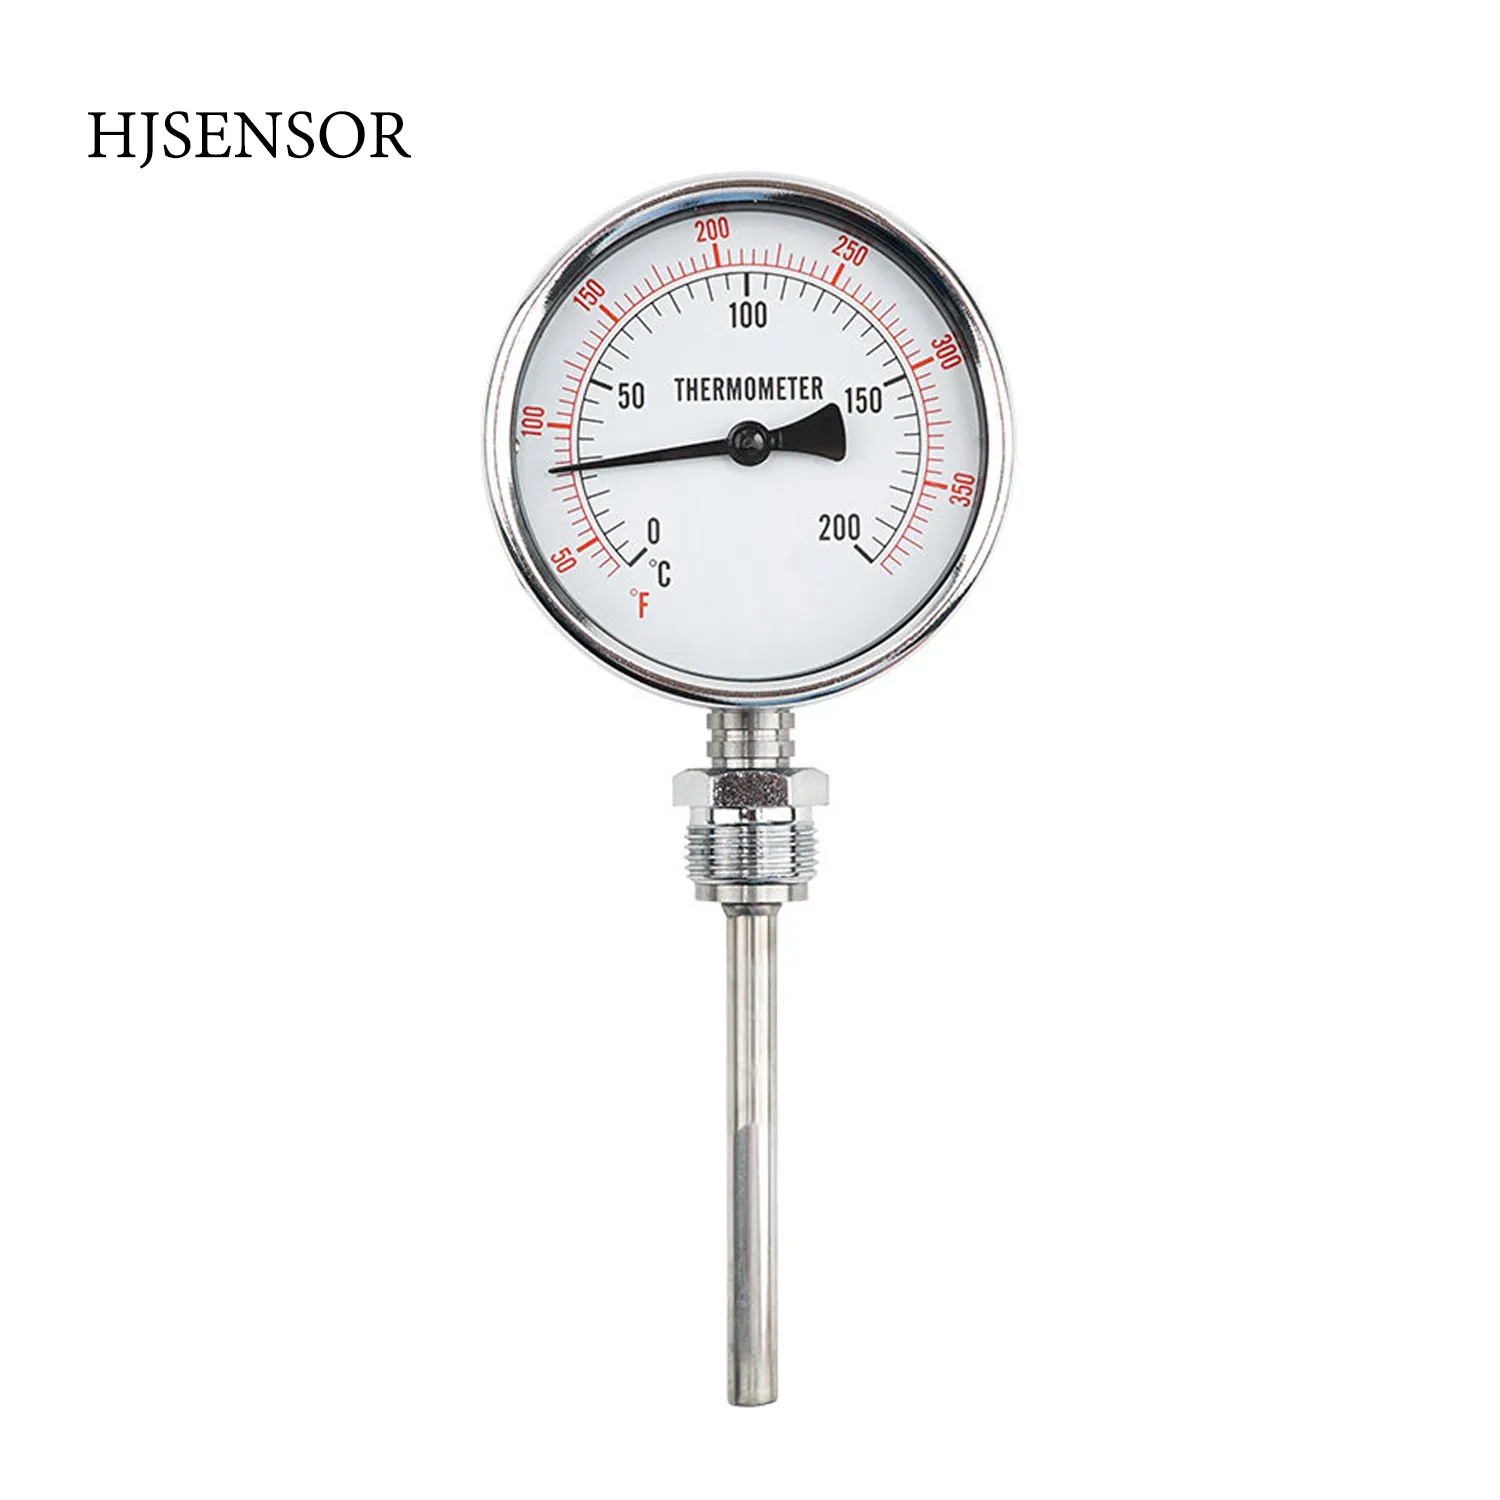 High quality stainless steel industry universal bimetal thermometer Temperature Gauge